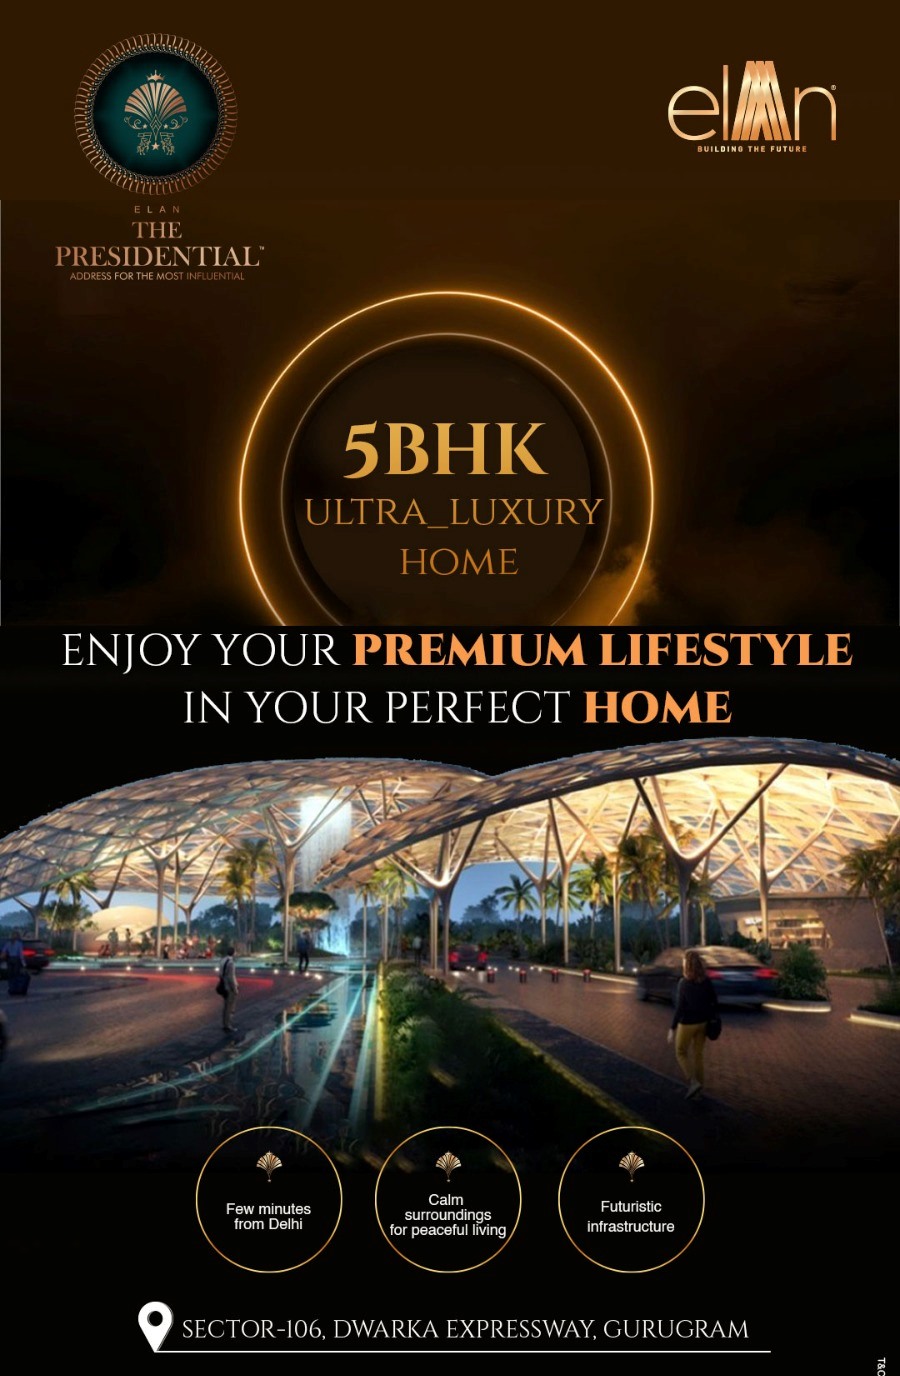 Ultra luxury home enjoy your premium lifestyle in your perfect home at Elan The Presidential, Gurgaon